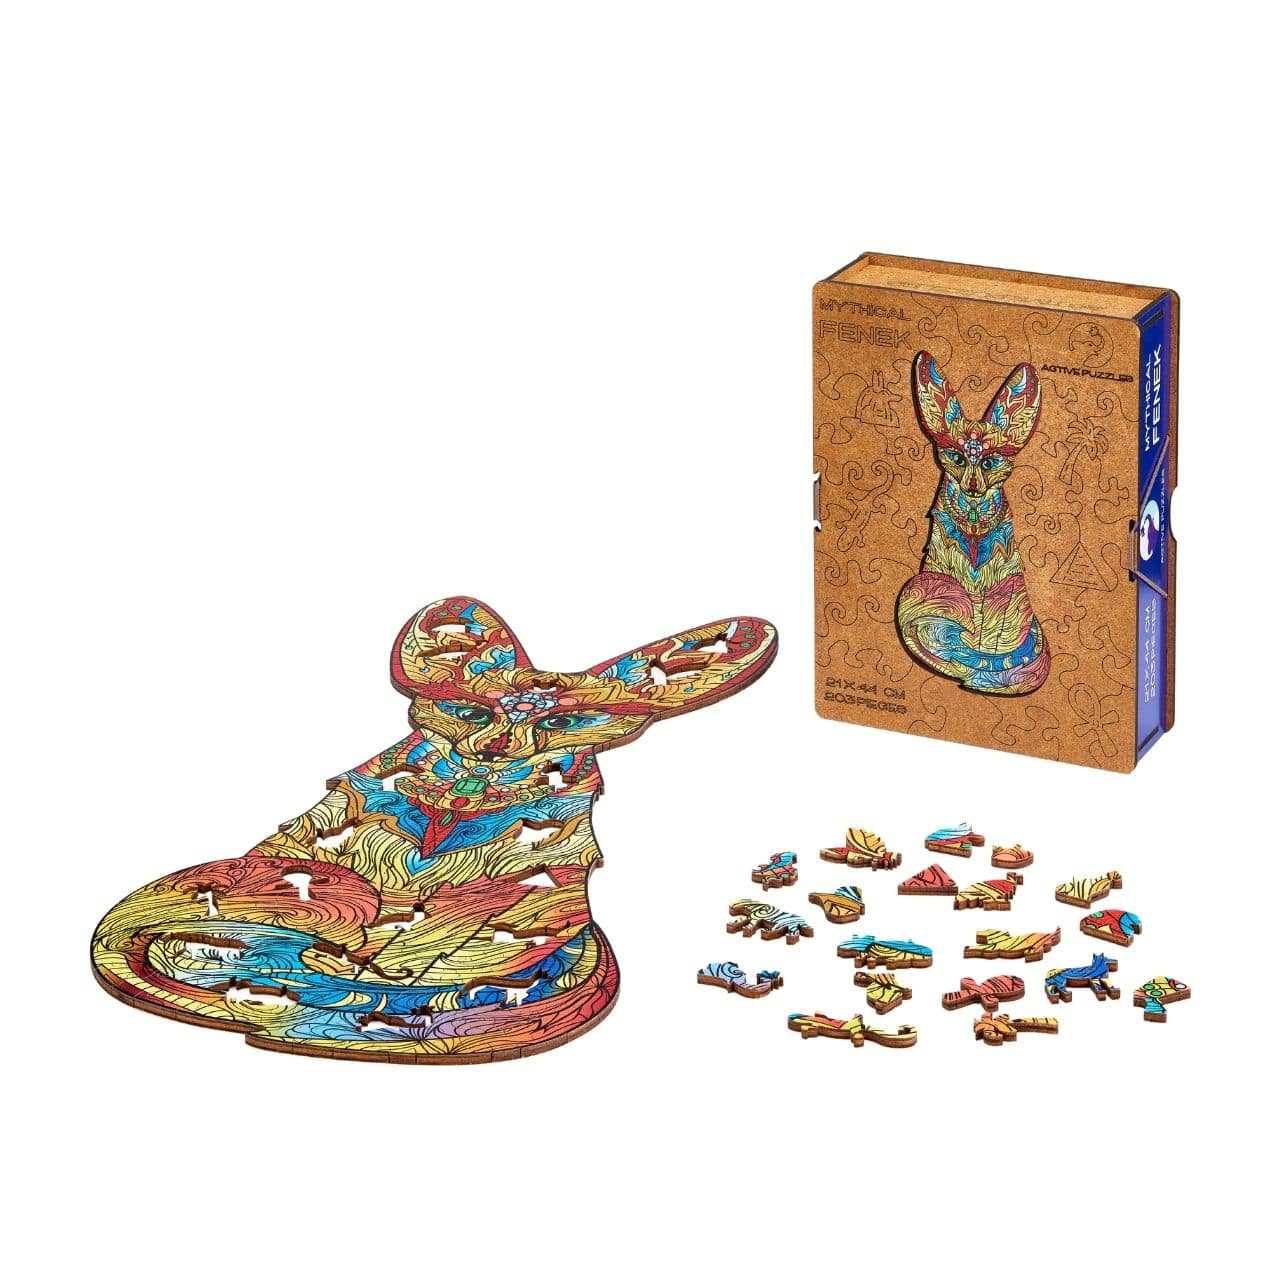 Yellow Fenec Wooden Puzzle | Animal Wooden Puzzles Active Puzzles